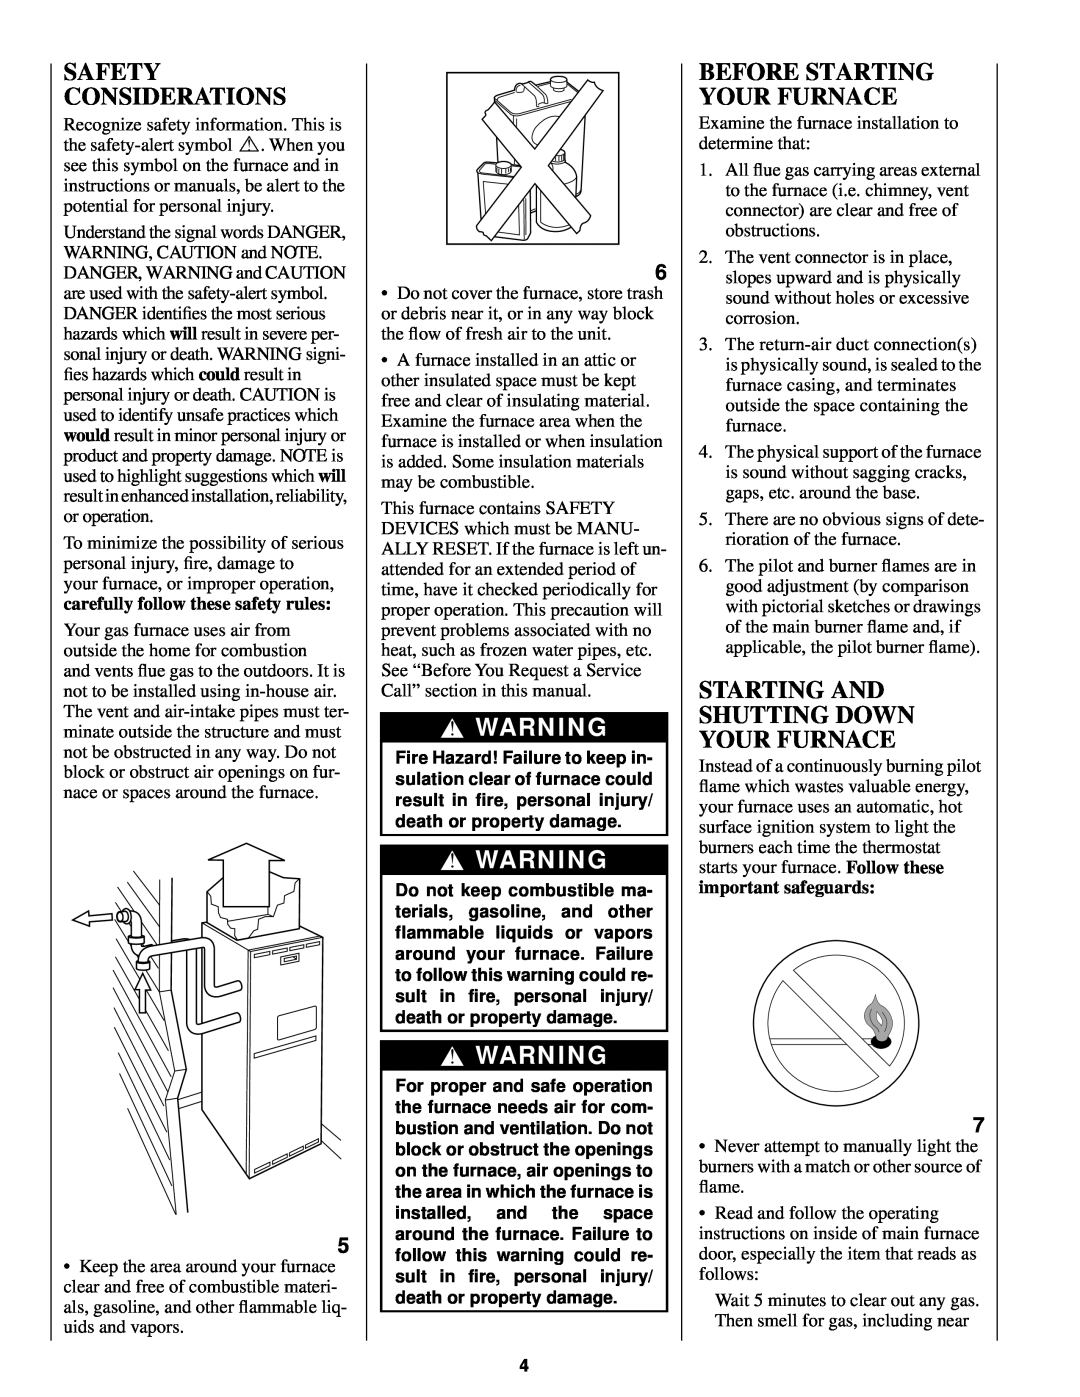 Bryant 340MAV manual Starting And Shutting Down Your Furnace, Safety Considerations, Before Starting Your Furnace 